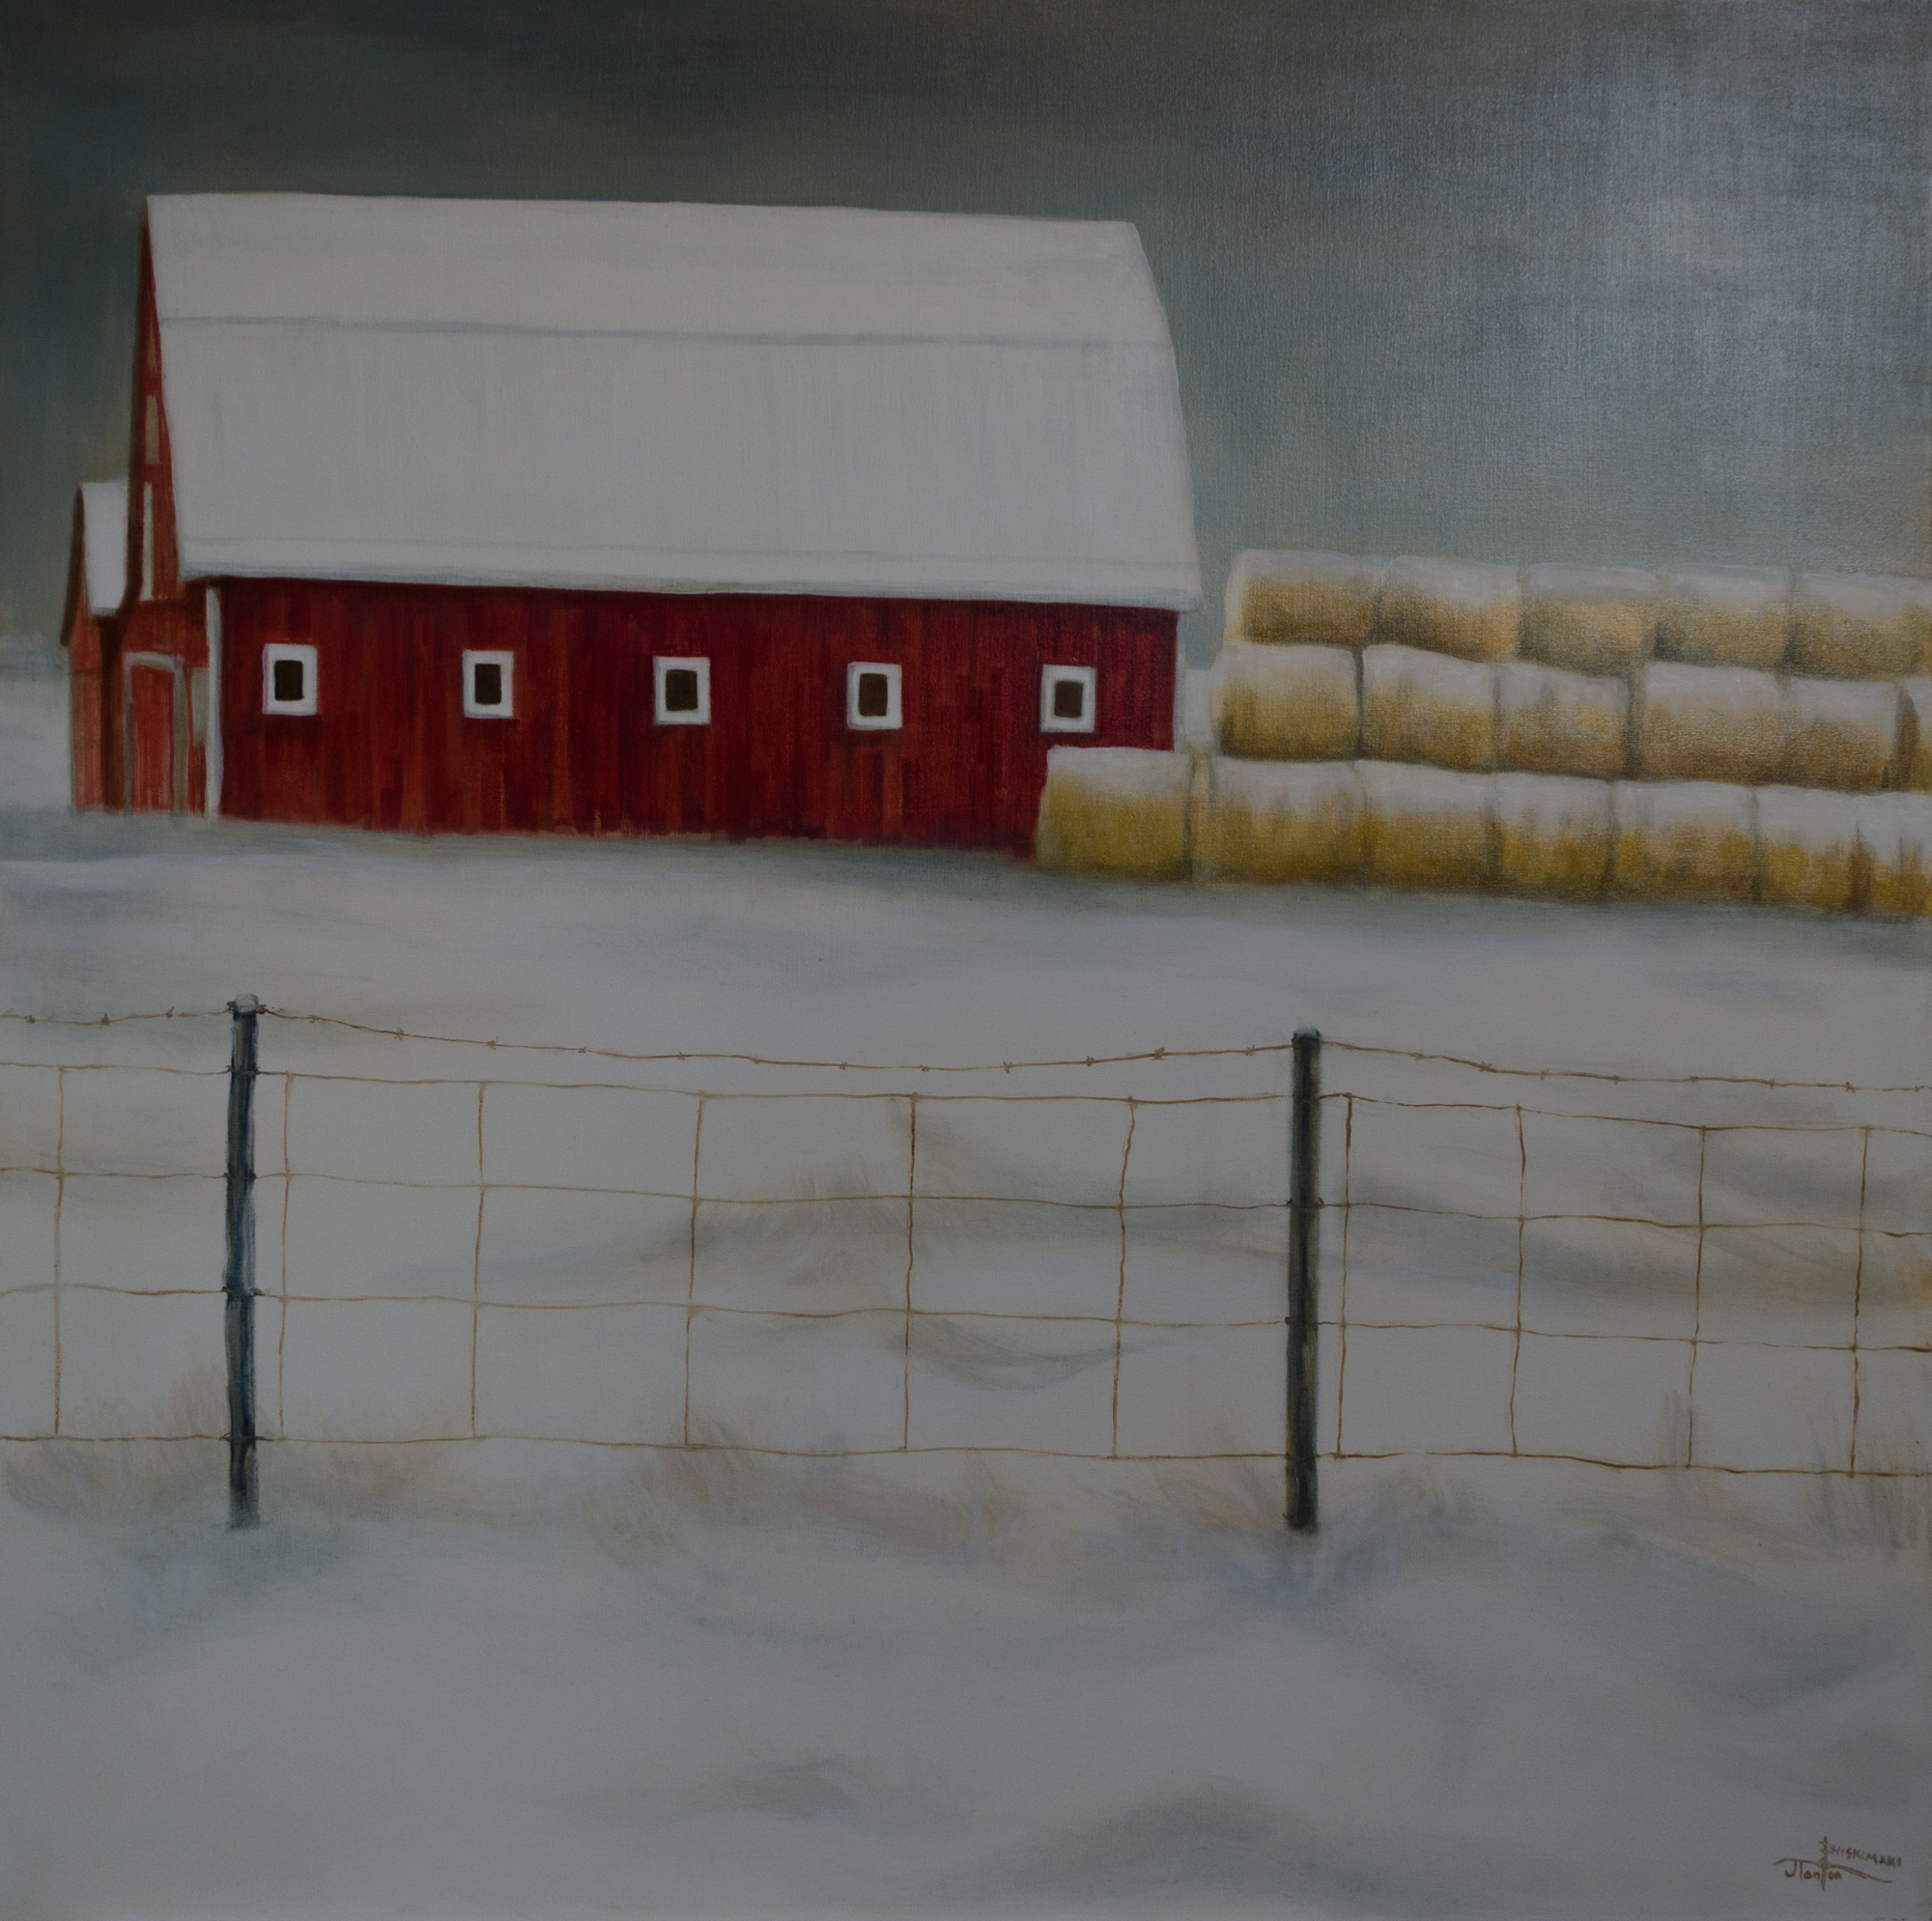 "Just Before The Storm" ©2015 Janice Tanton. Oil on linen 42.48